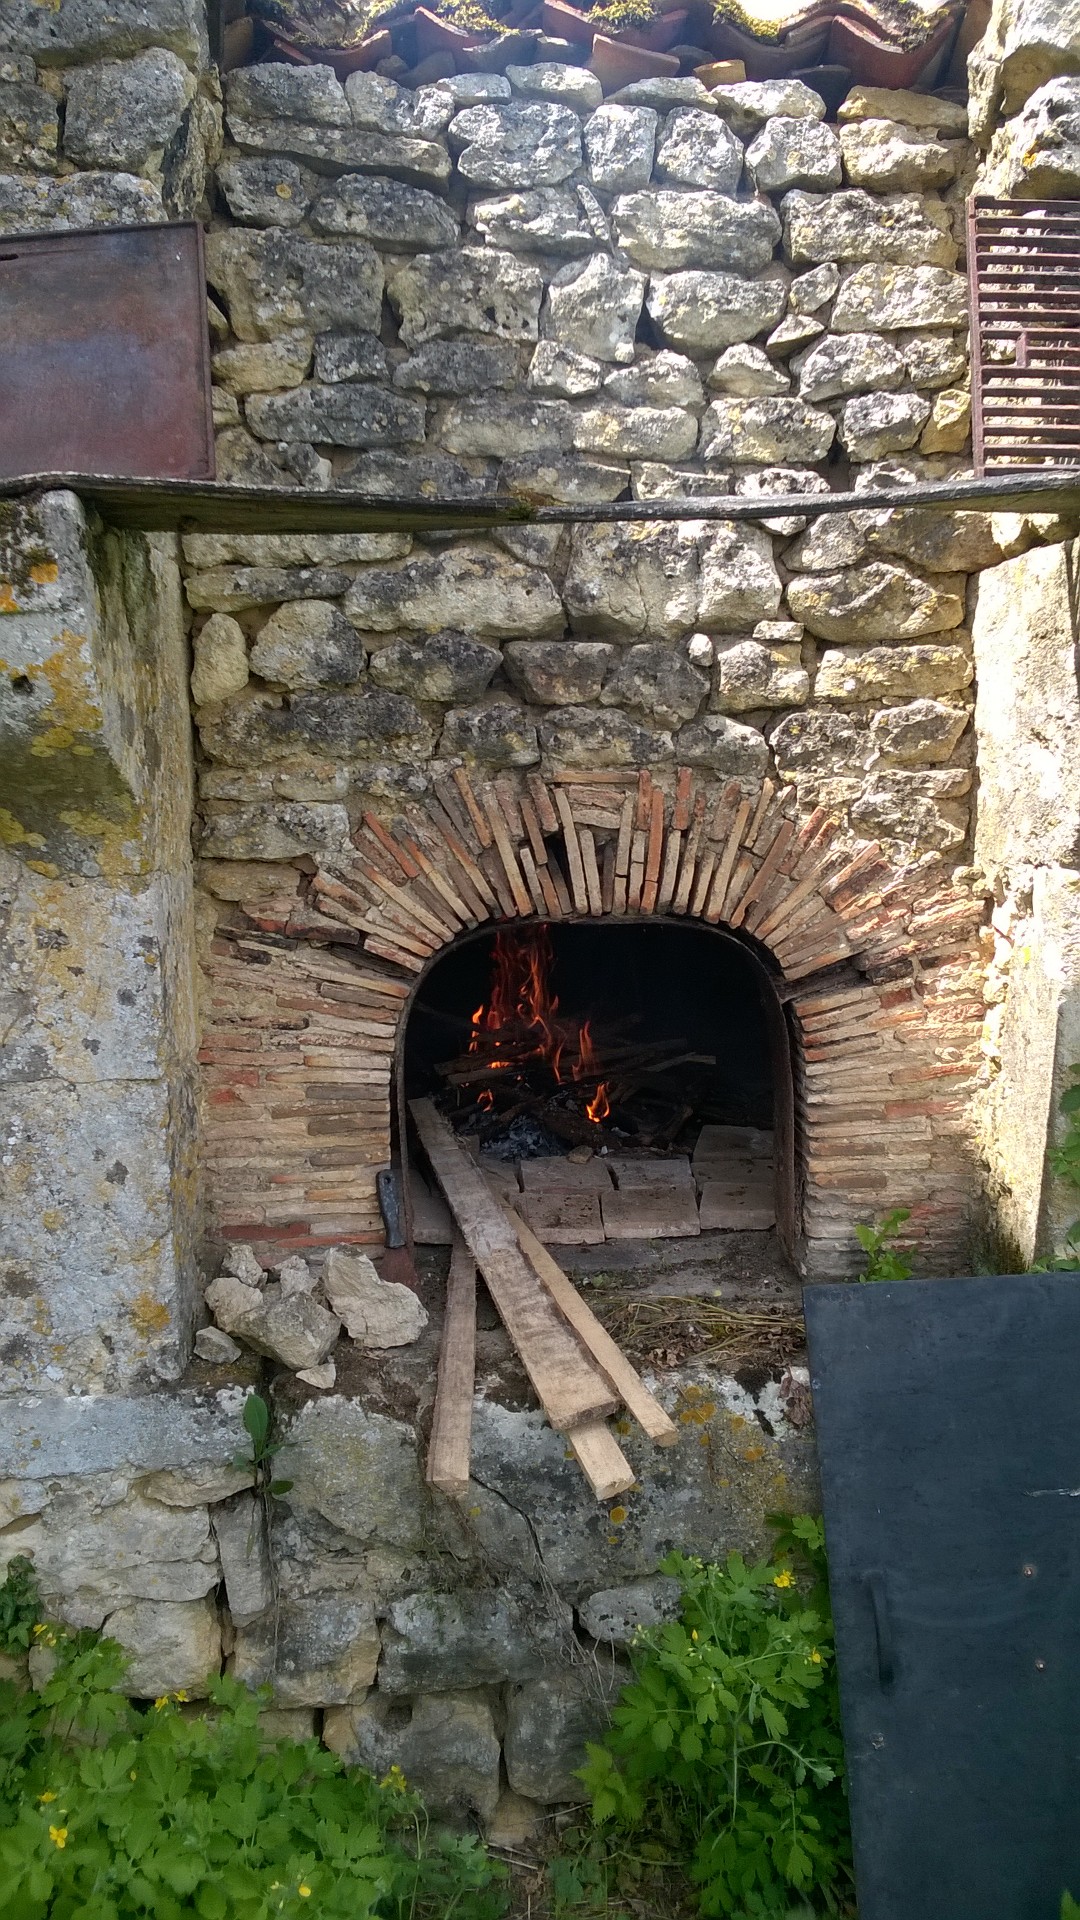 Pizza Oven Thread - Page 3 - Food, Drink & Restaurants - PistonHeads